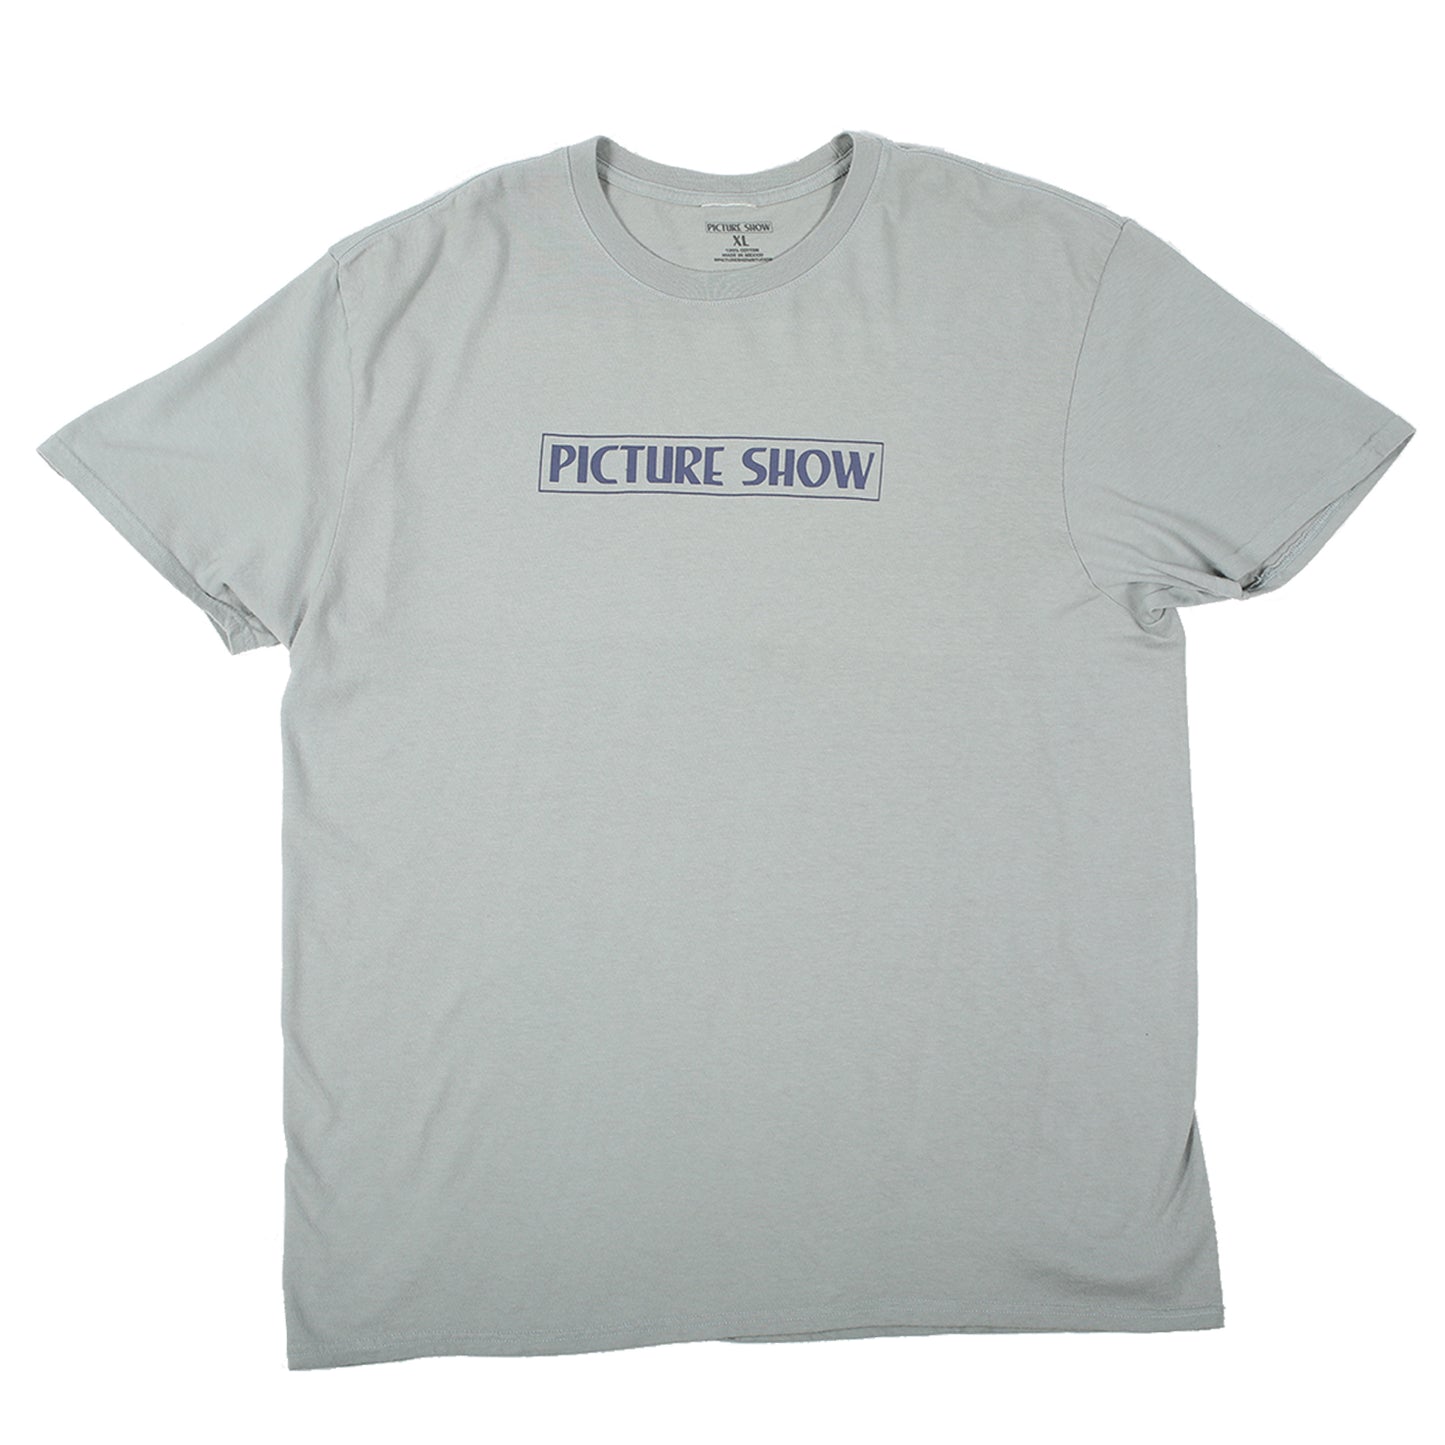 PICTURE SHOW VHS TEE - DOVE GREY